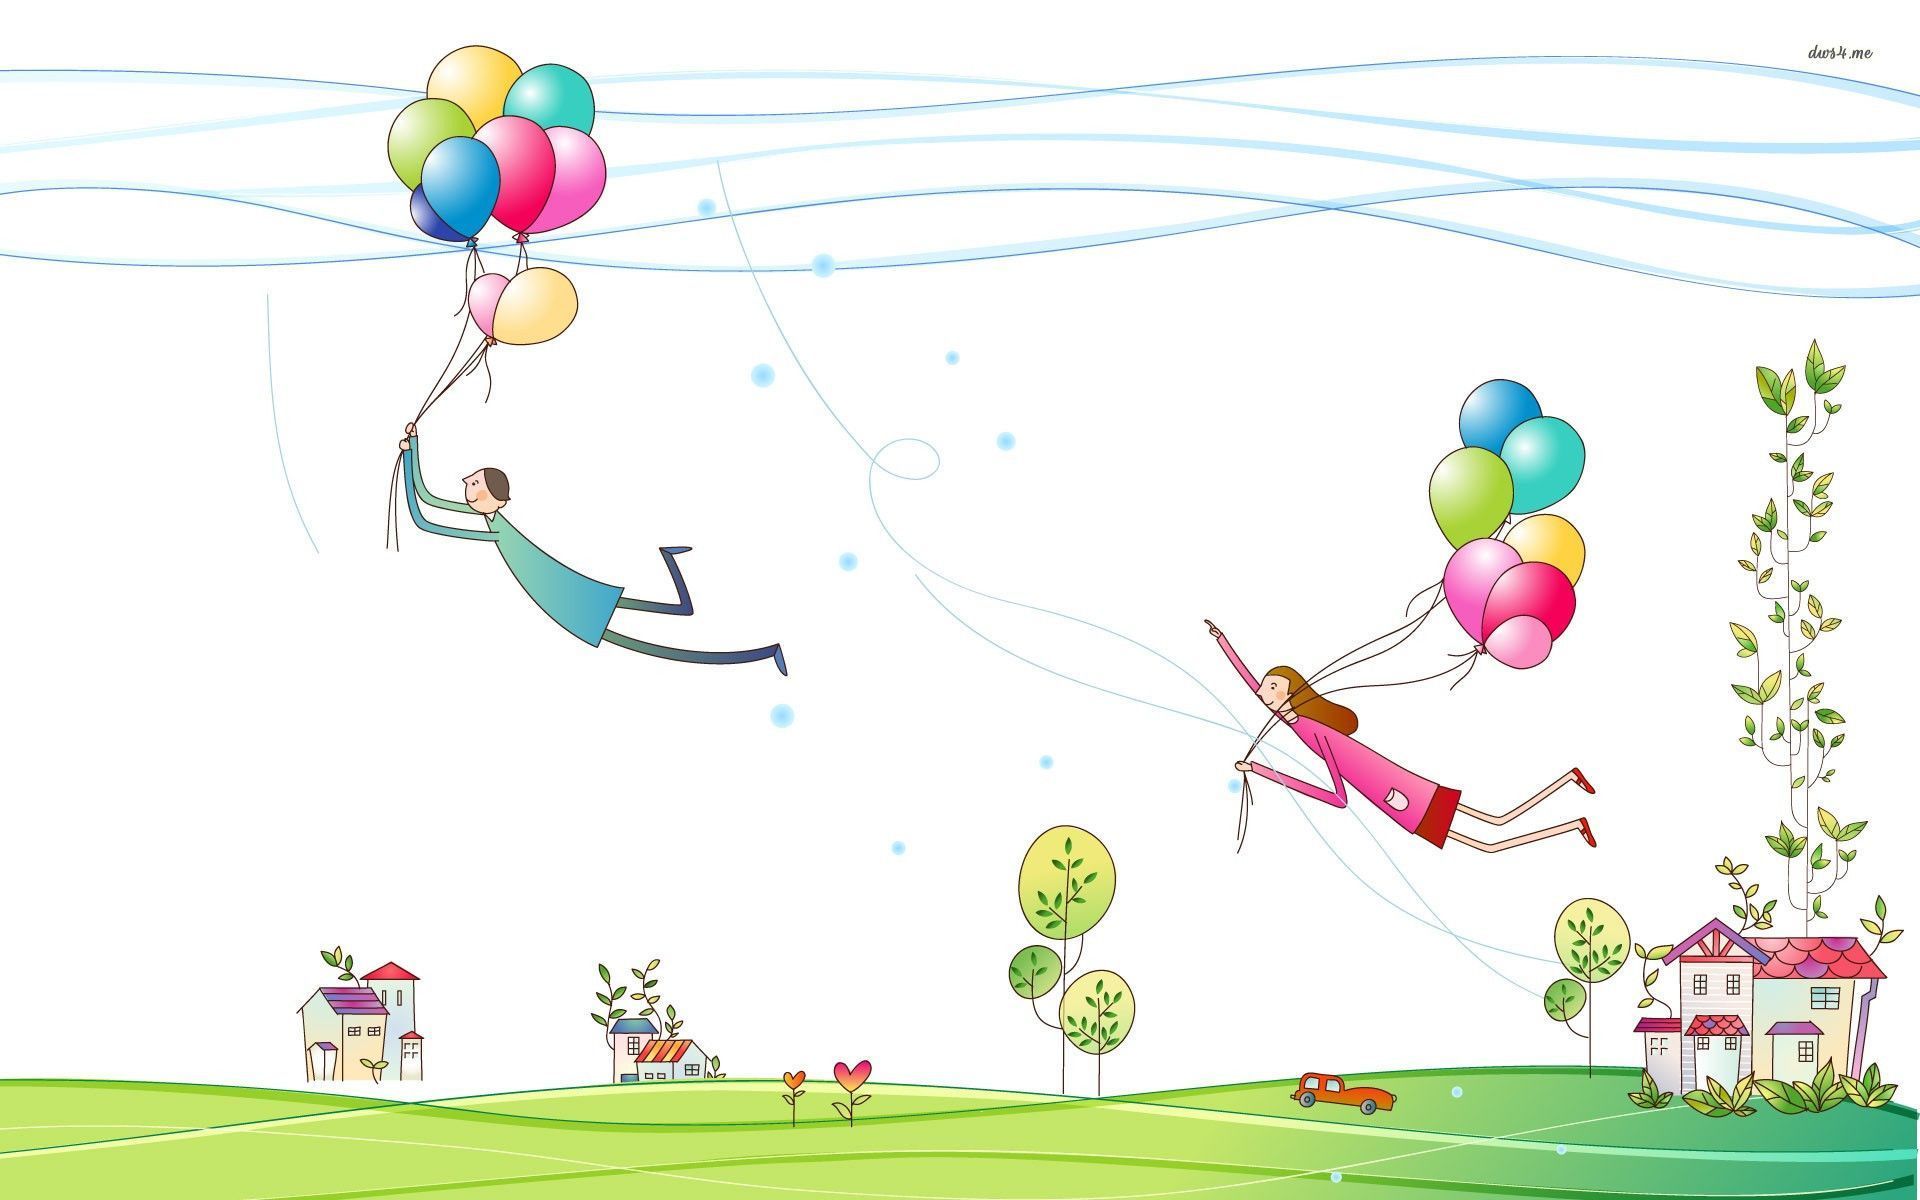 Couple flying away with balloons wallpaper - Artistic wallpapers ...